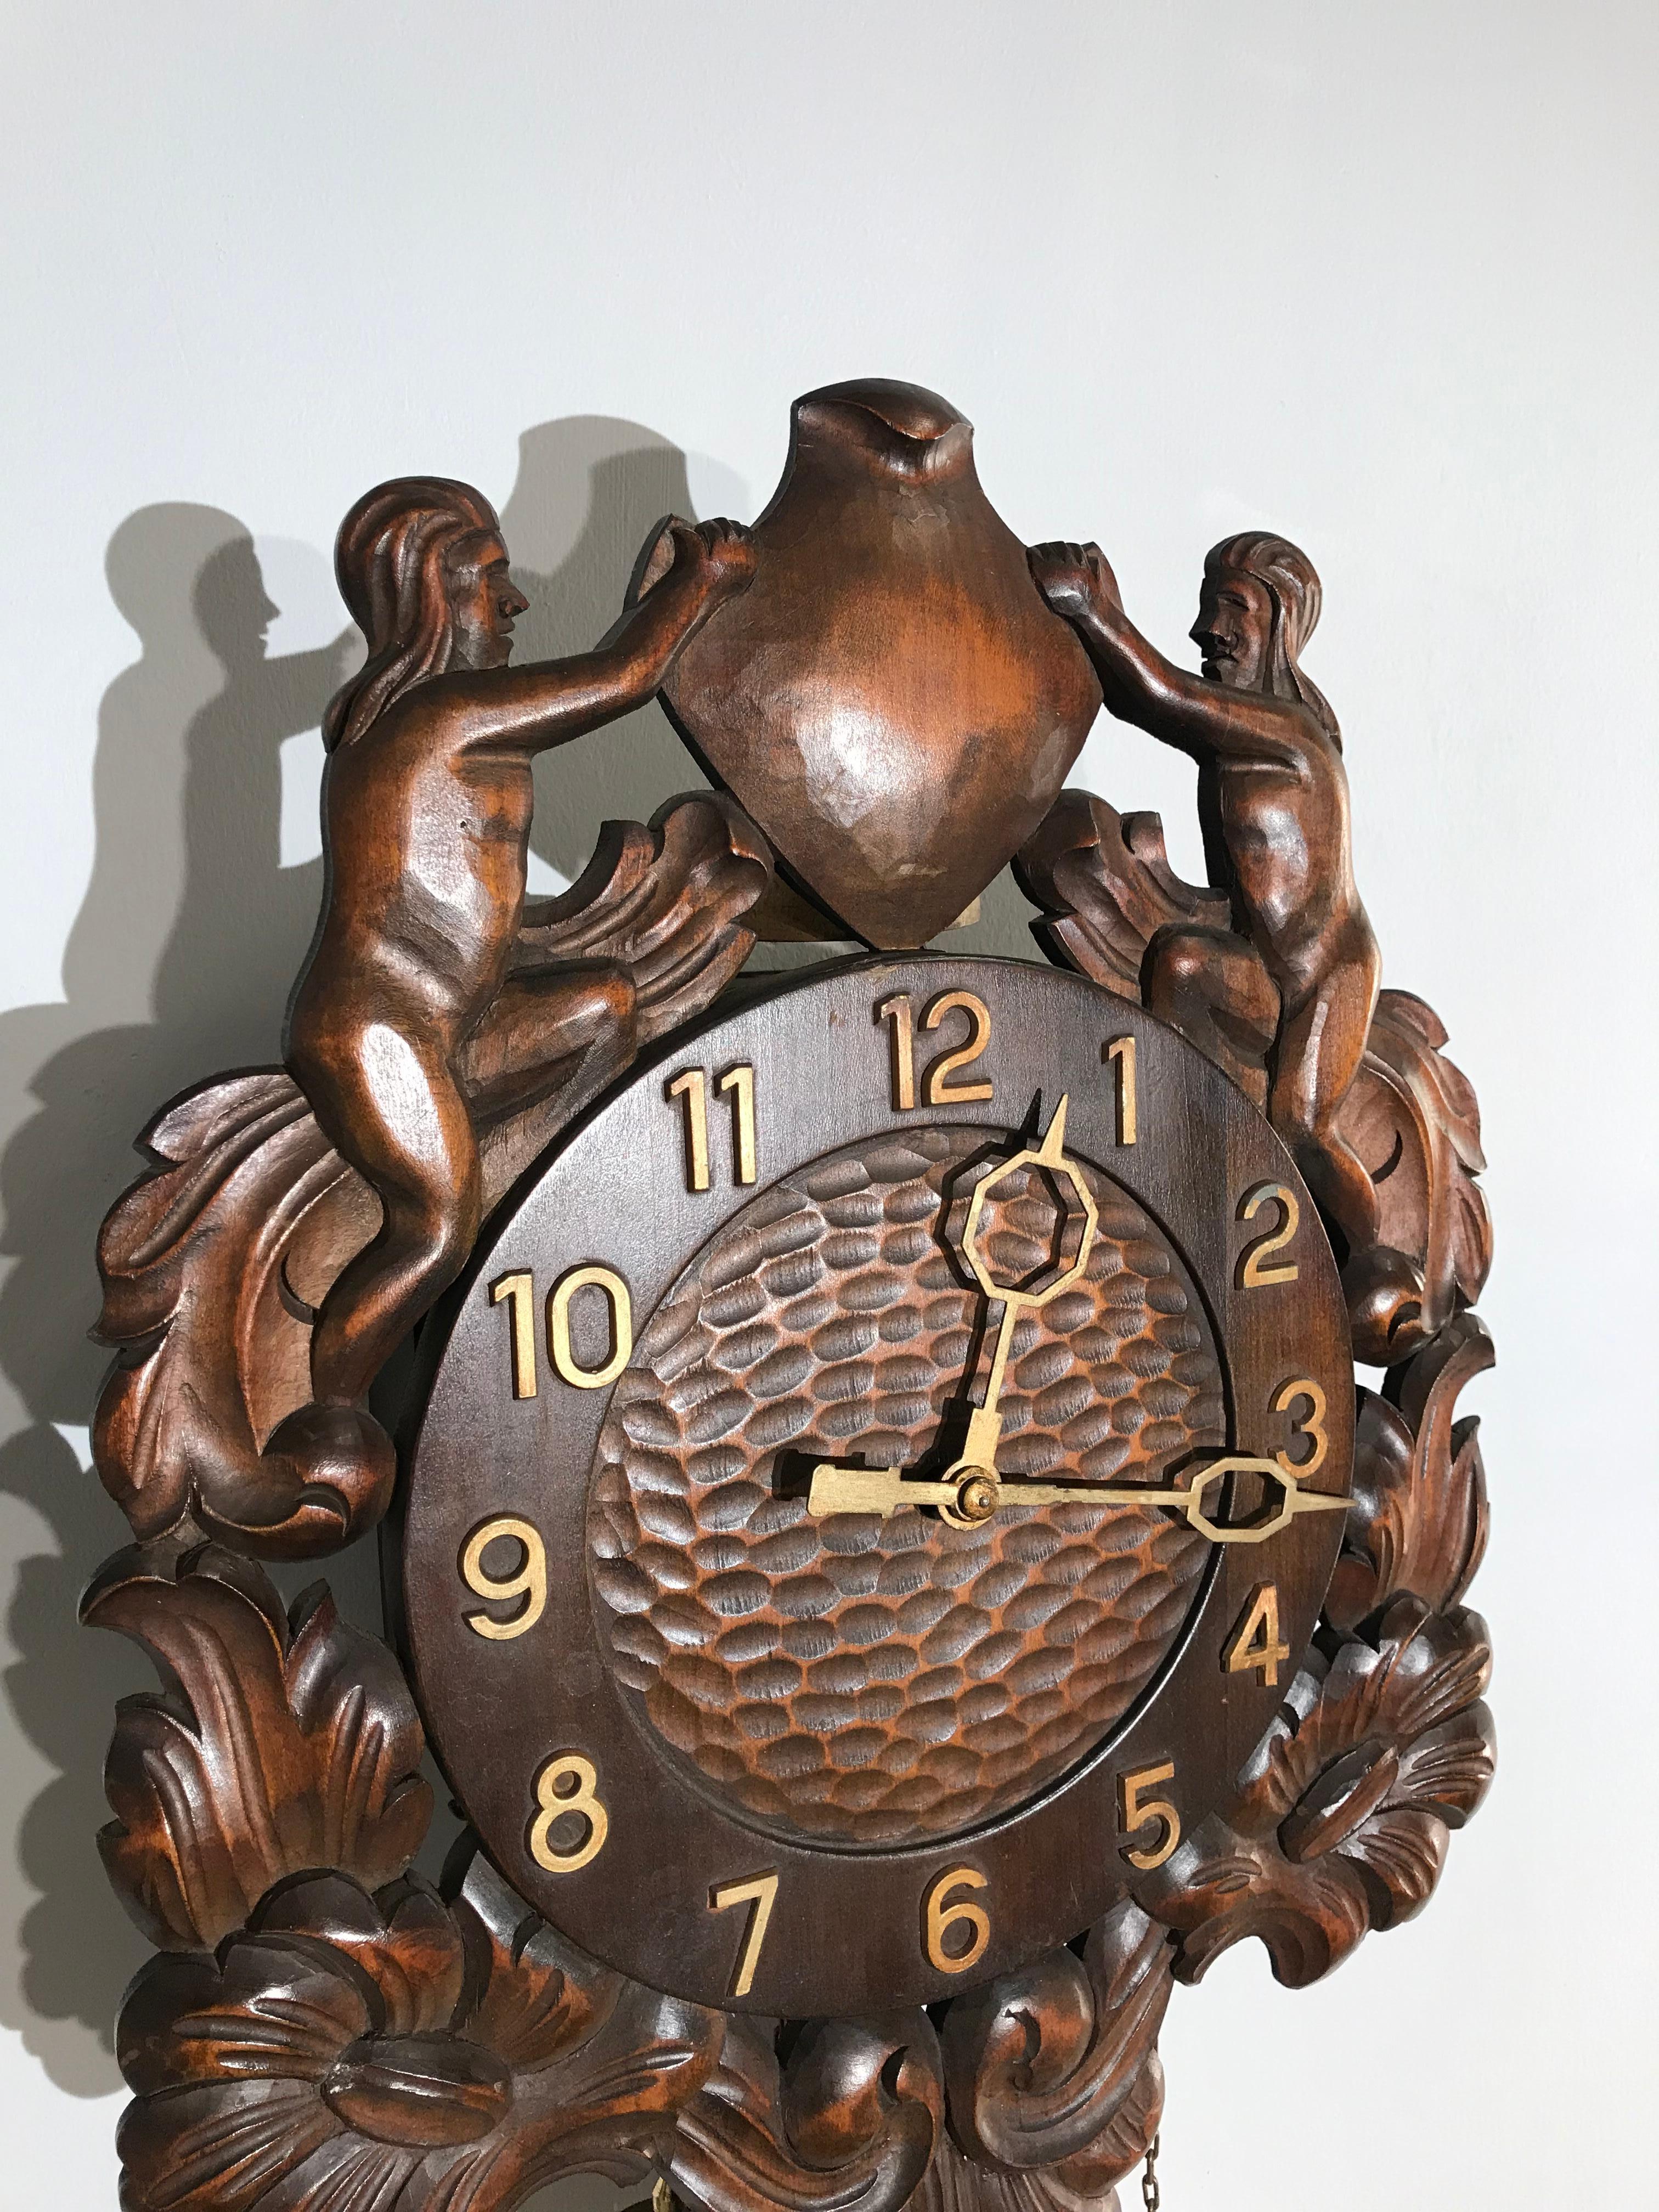 Unique Denmark Made Classical Roman Wall Clock with Sculptures and Flowers For Sale 6